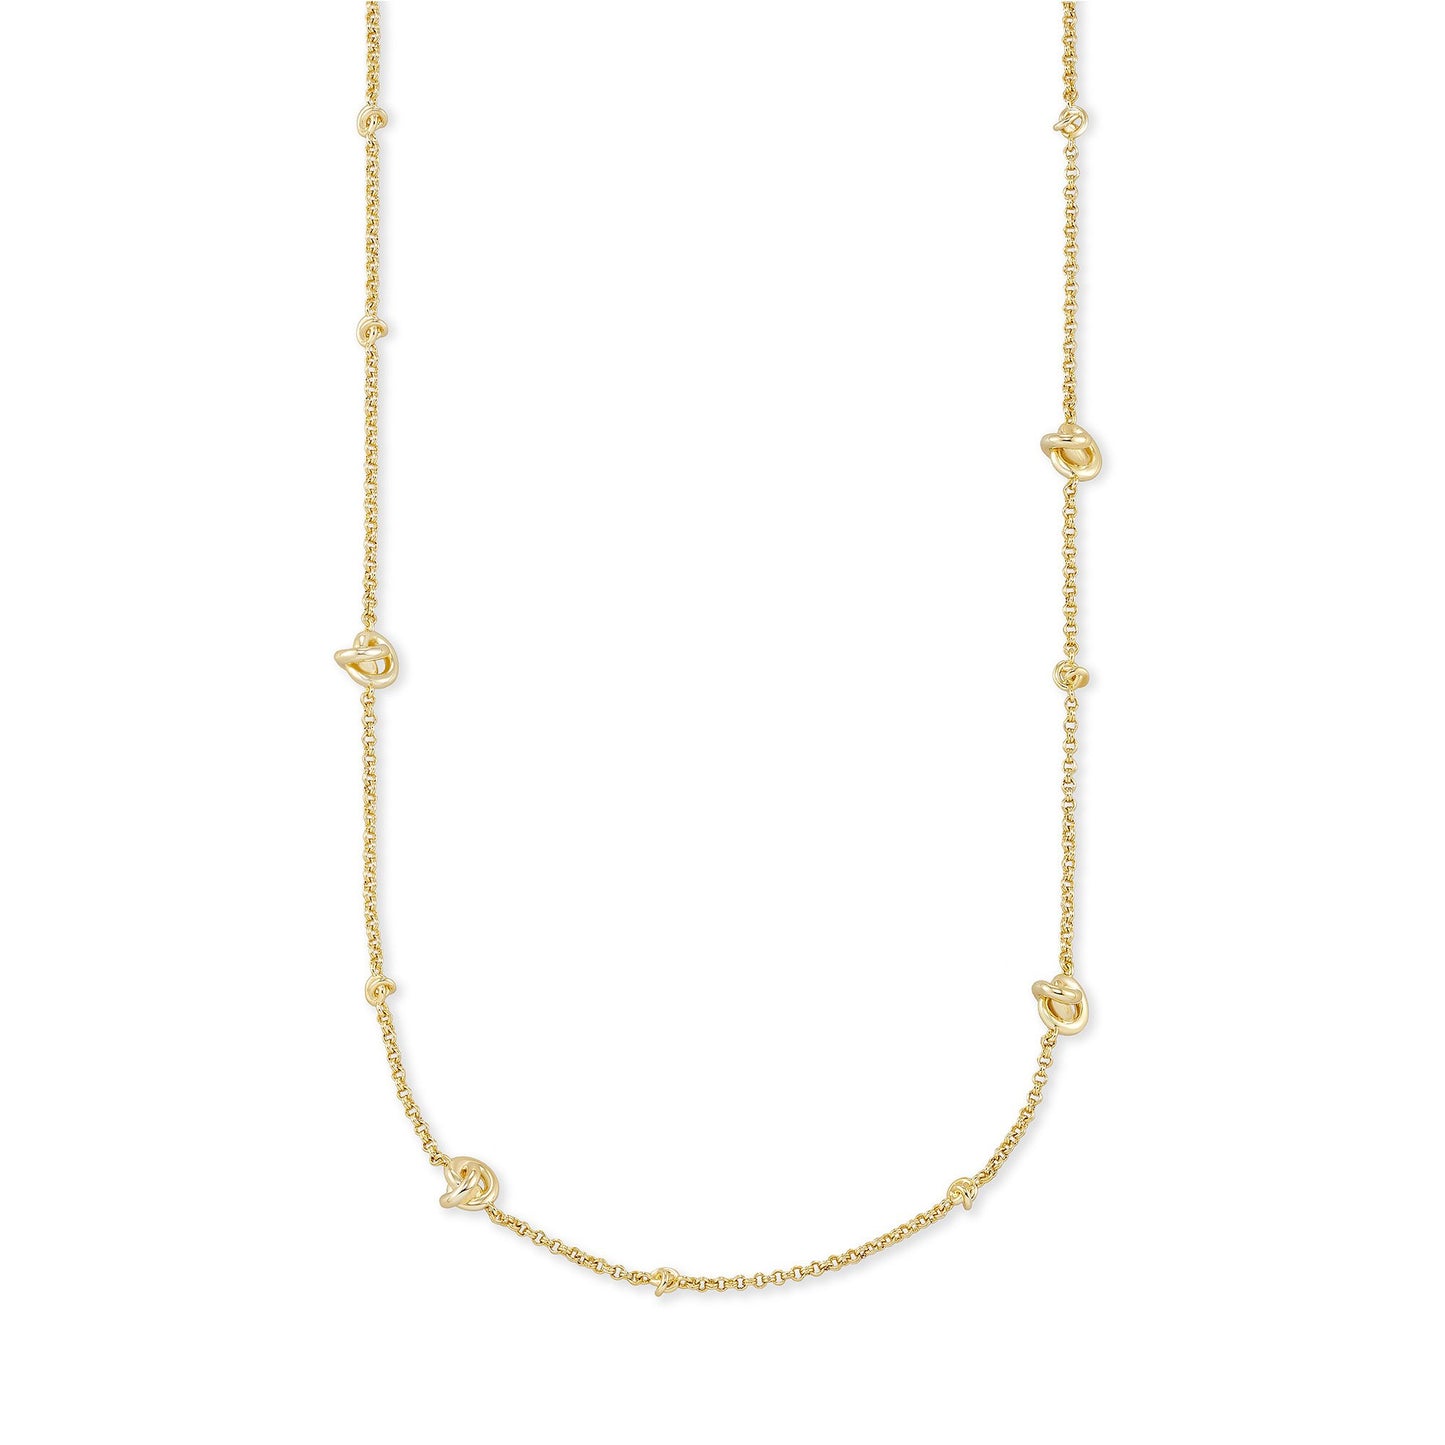 Presleigh Adjustable Necklace in Gold